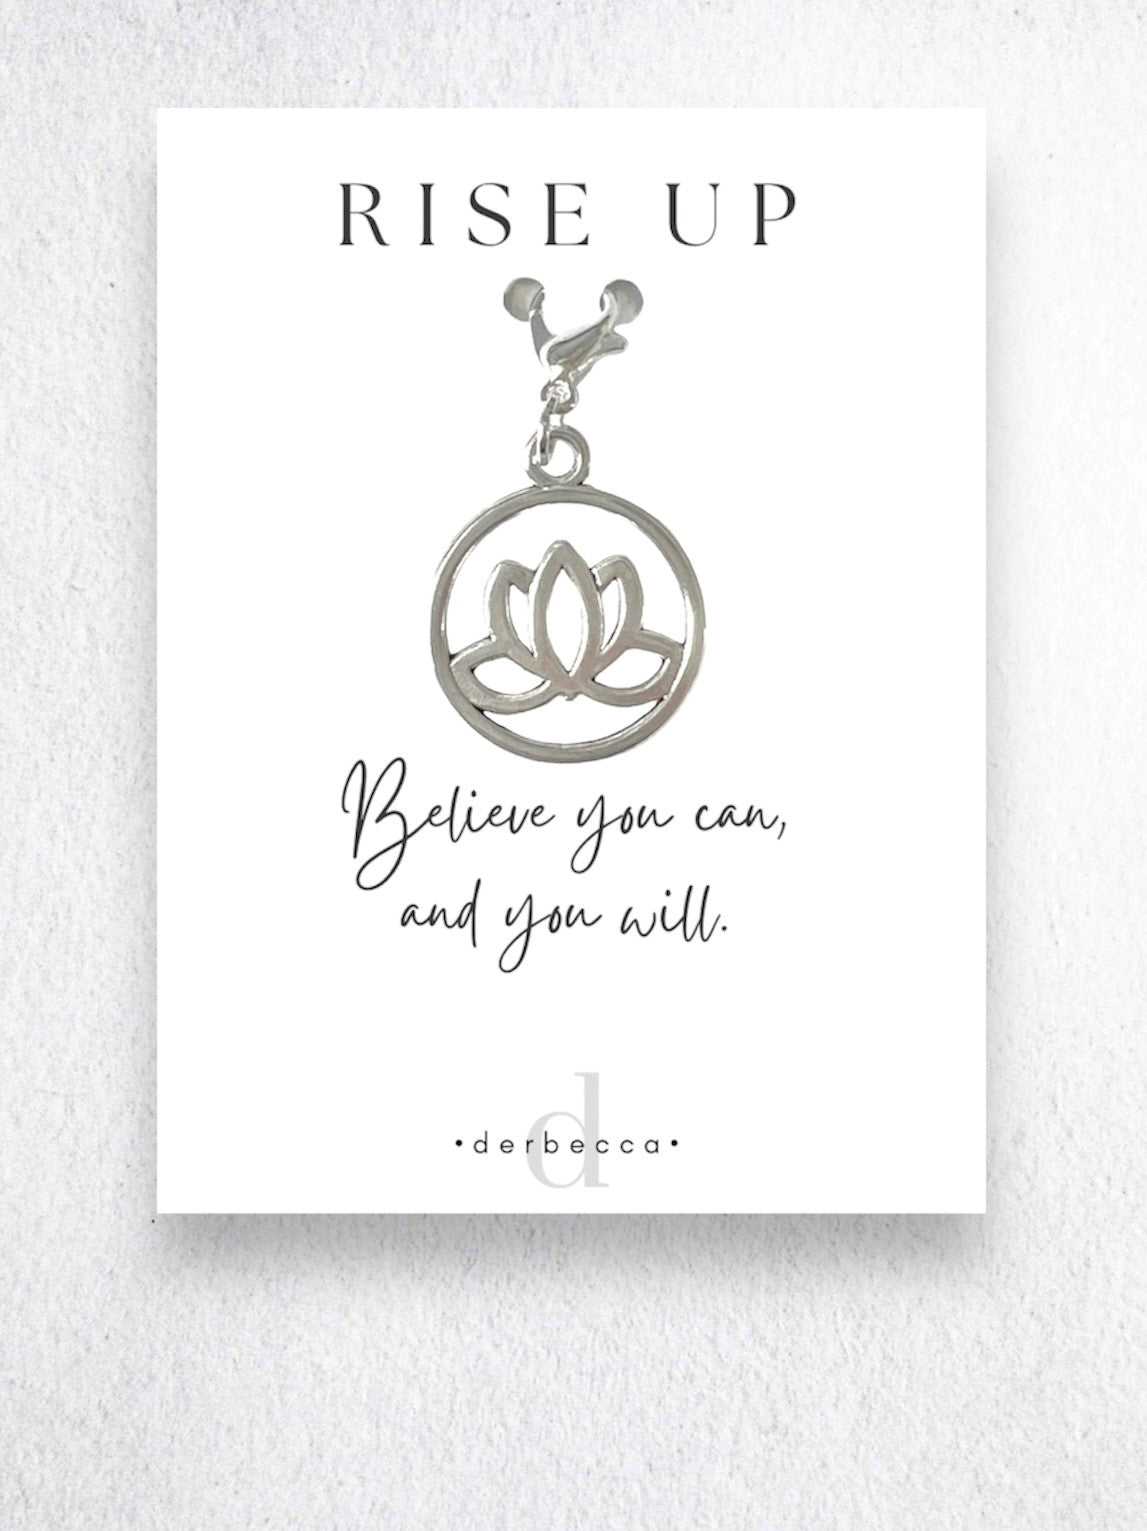 Lotus Flower Charm Jewelry Pendant Zipper Pull Clip-On Charm Clip Accessory Lobster Claw Clasp with Poem Verse Inspirational Saying Card: RISE UP Believe you can, and you will.